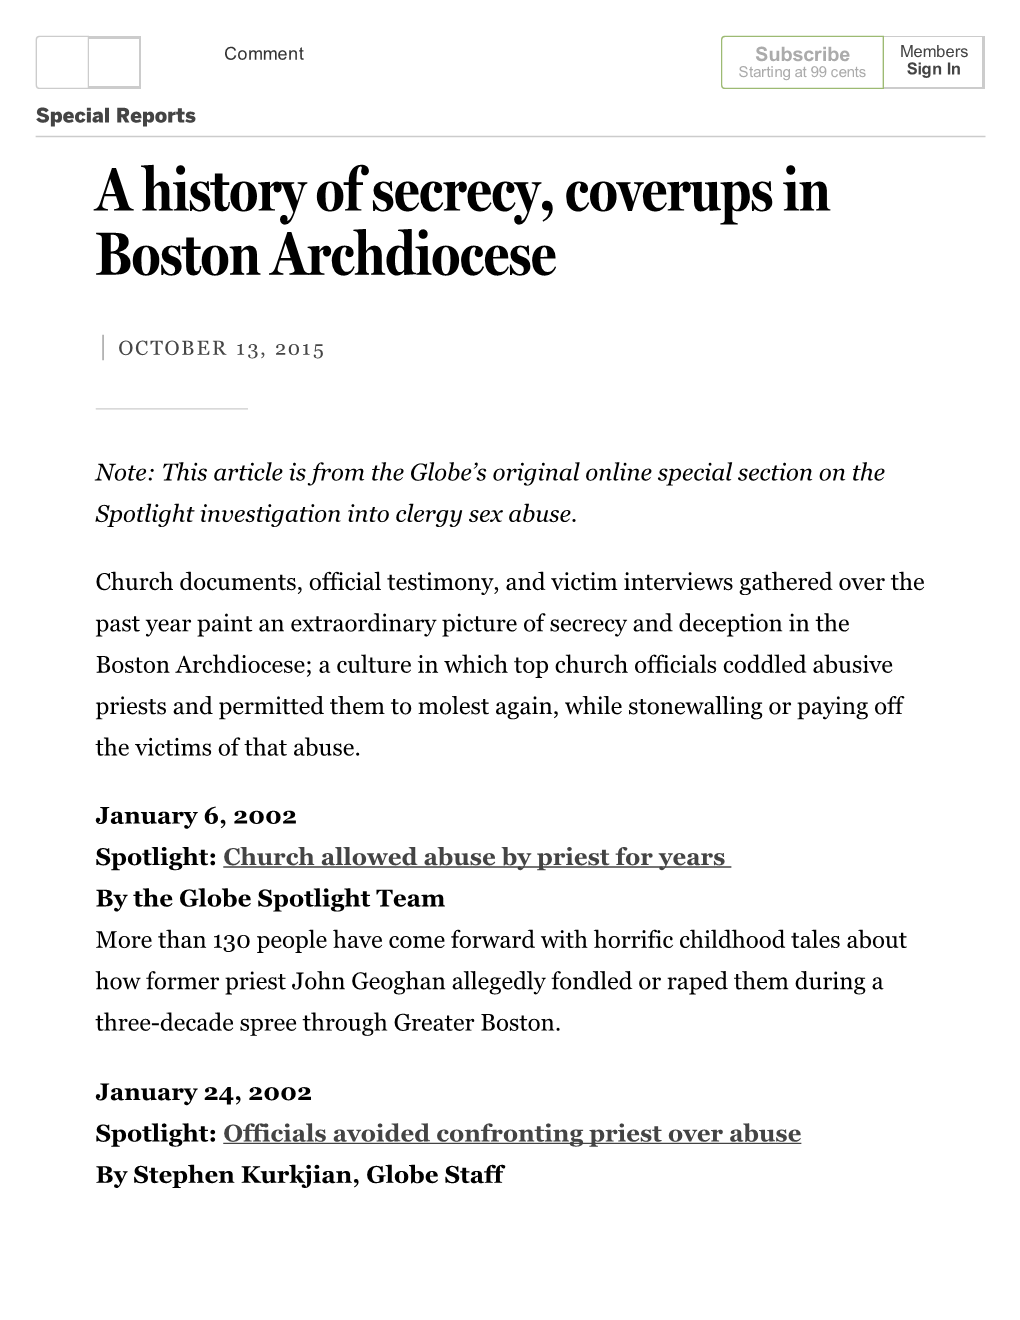 A History of Secrecy, Coverups in Boston Archdiocese